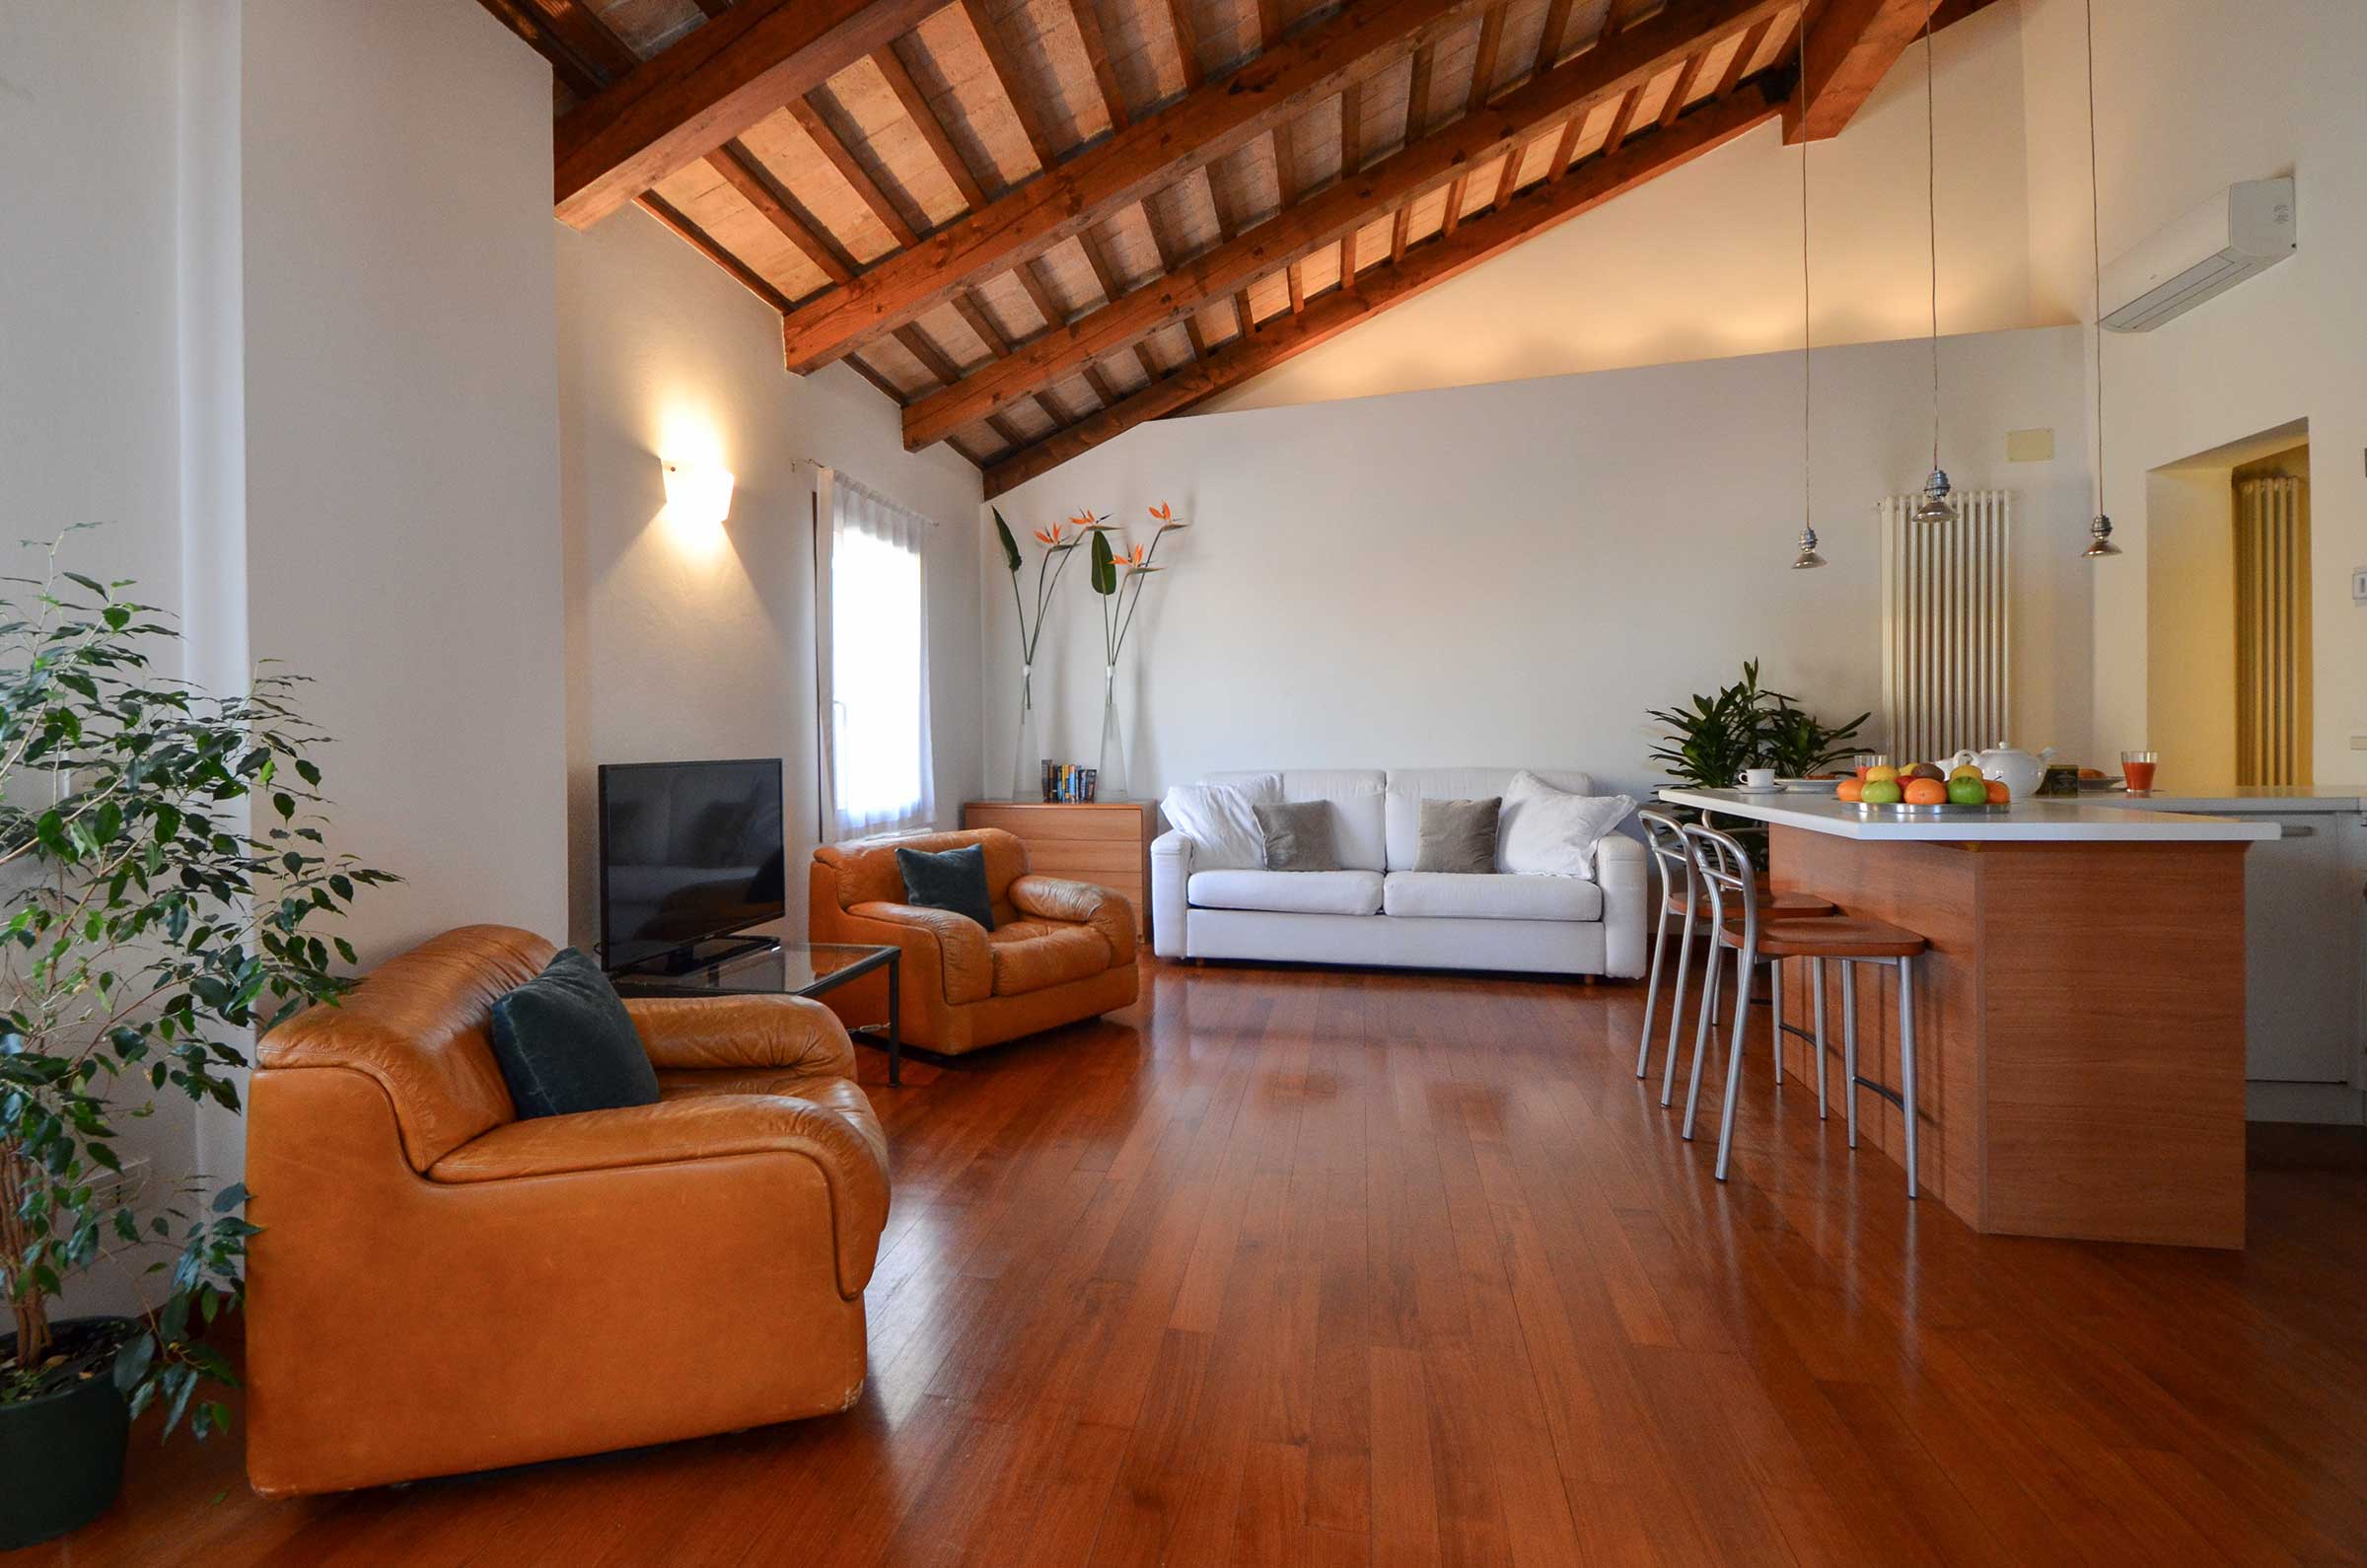 this loft is located centrally in a quiet spot away from the crowds